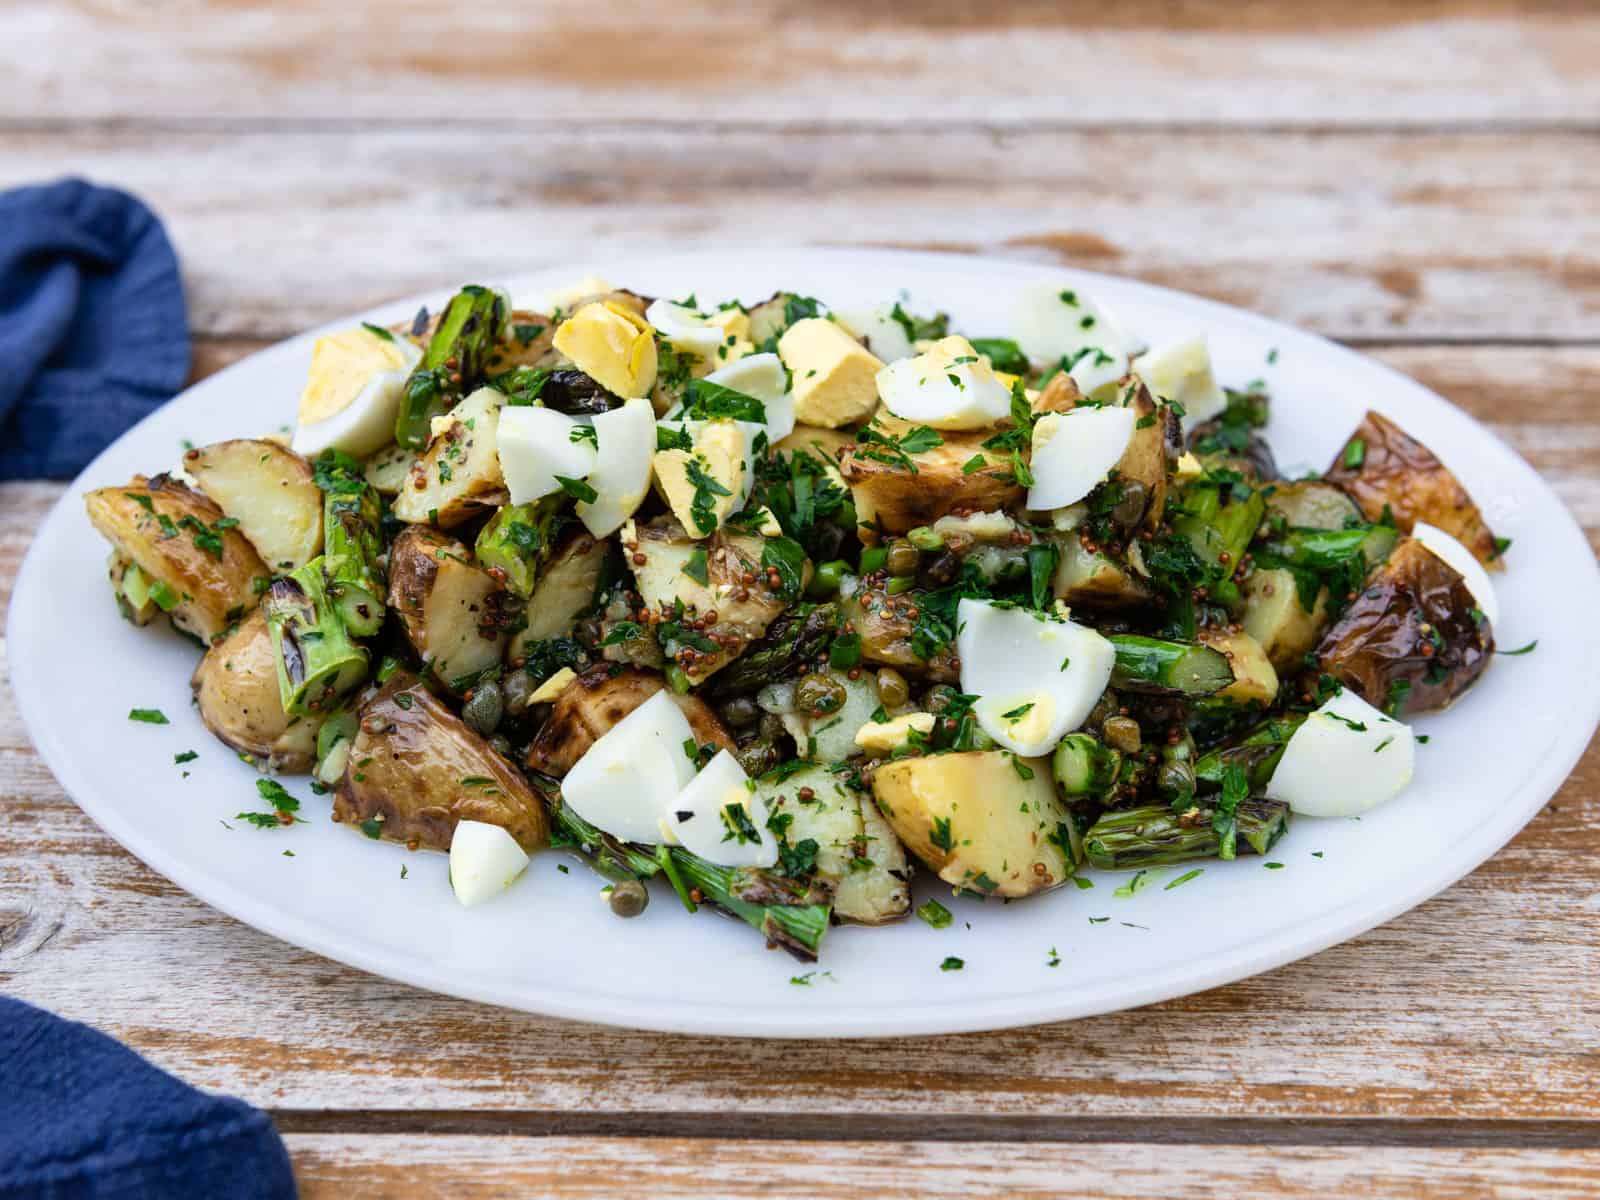 Grilled potato and asparagus salad with capers and hard boiled eggs.